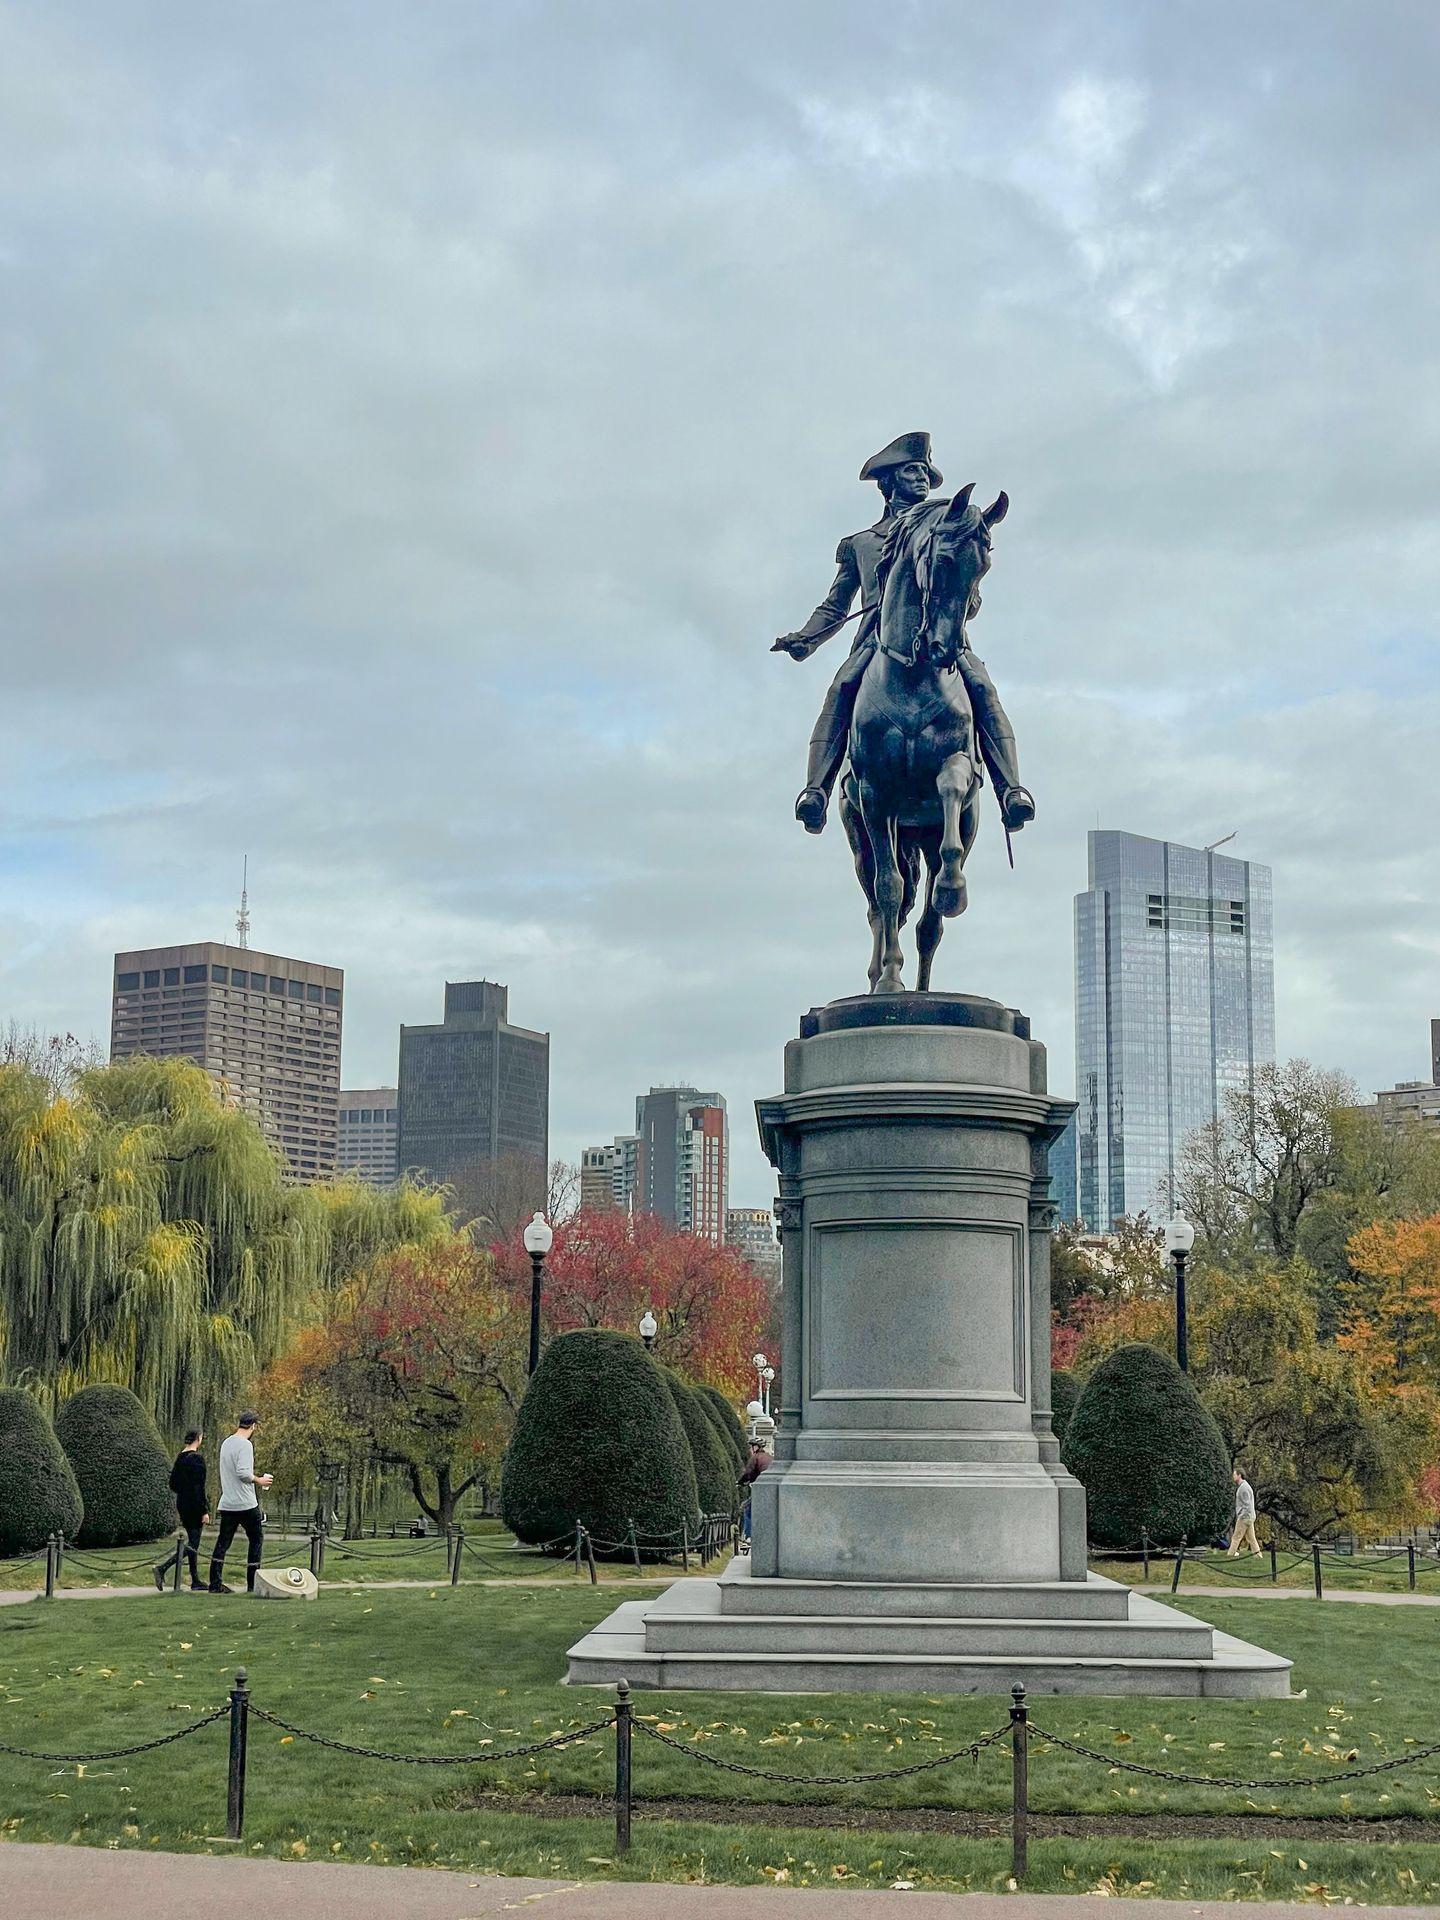 A tall statue with a man on horseback in the Public Garden in Boston.